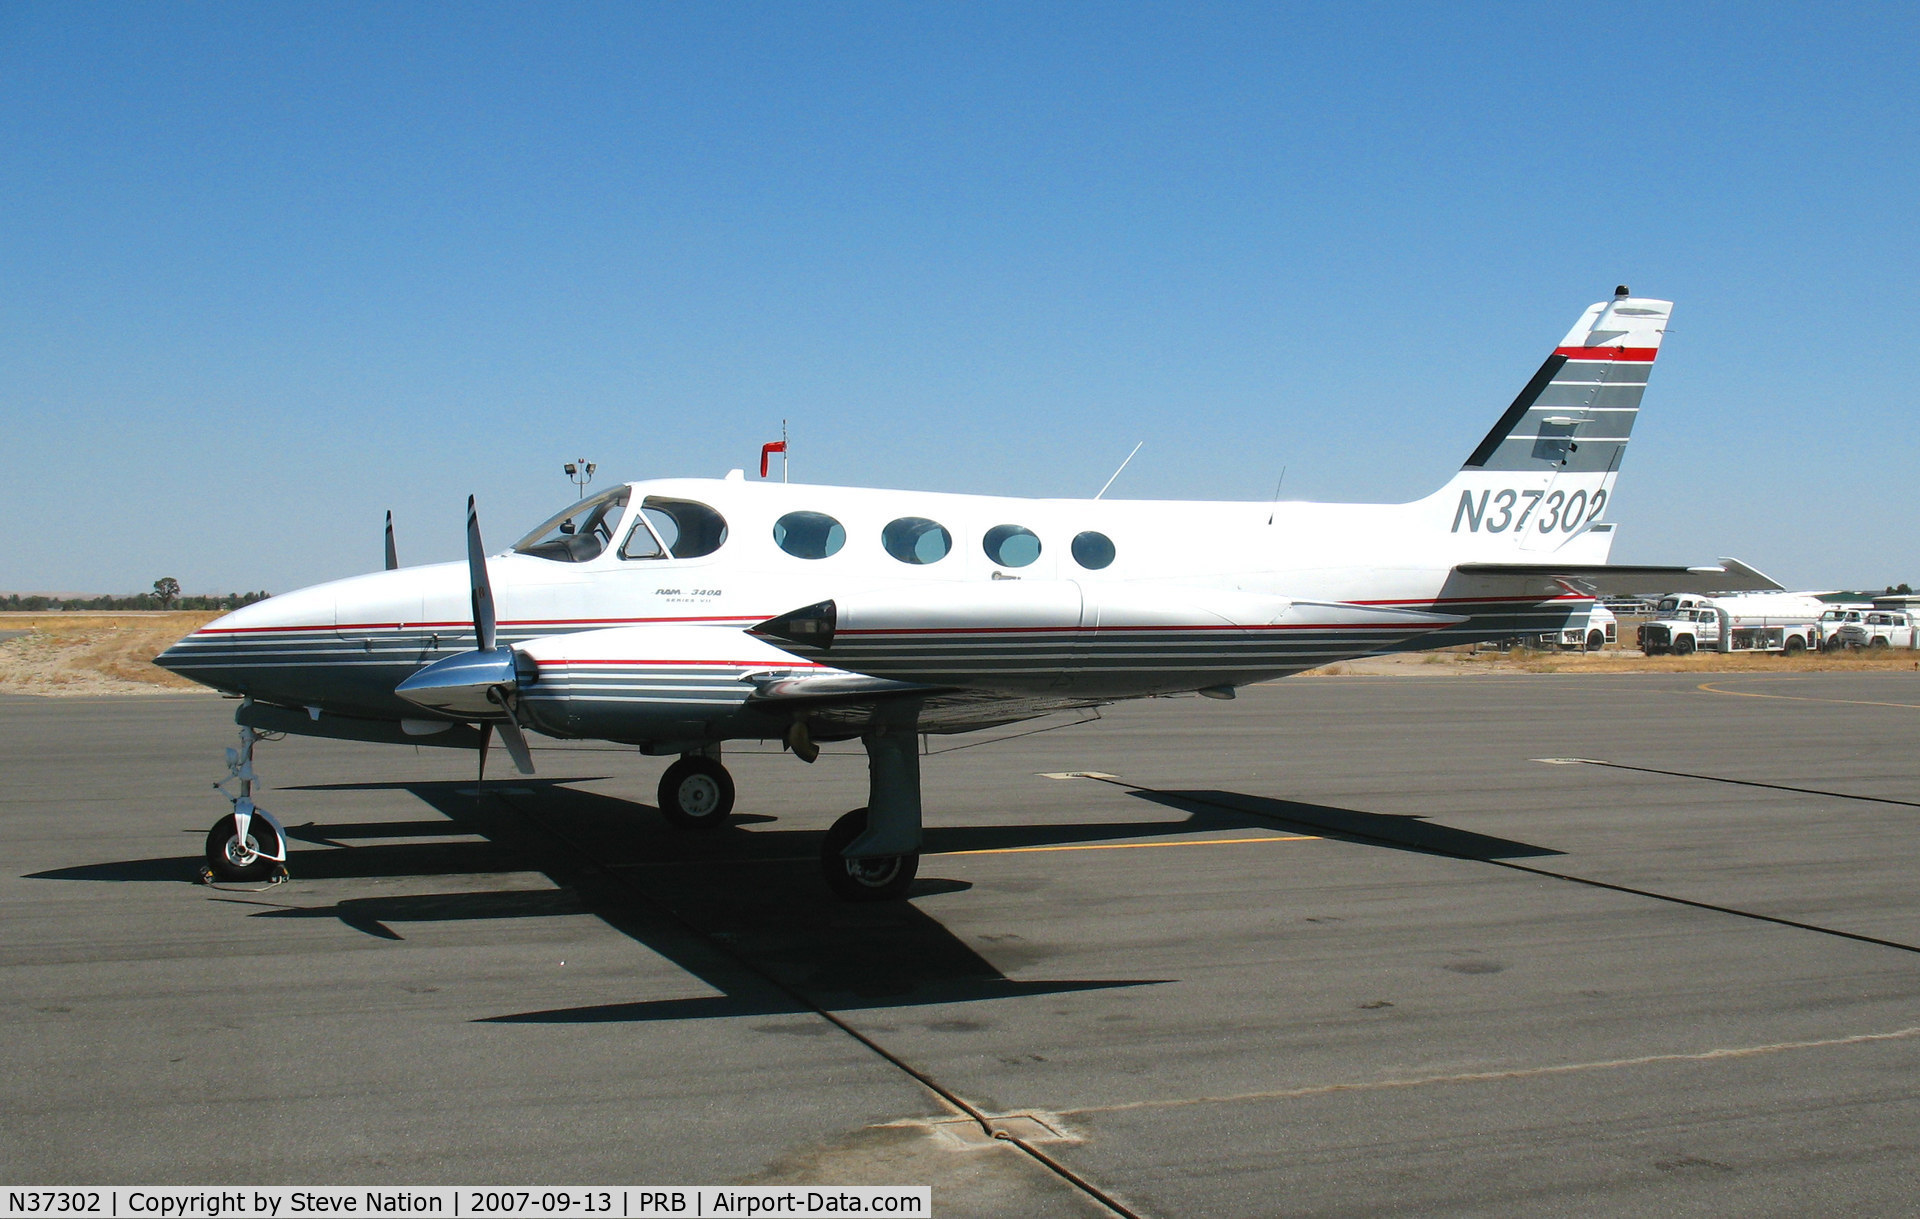 N37302, 1977 Cessna 340A C/N 340A0334, 1977 Cessna 340A visiting from Bakersfield, CA @ Paso Robles Municipal Airport, CA